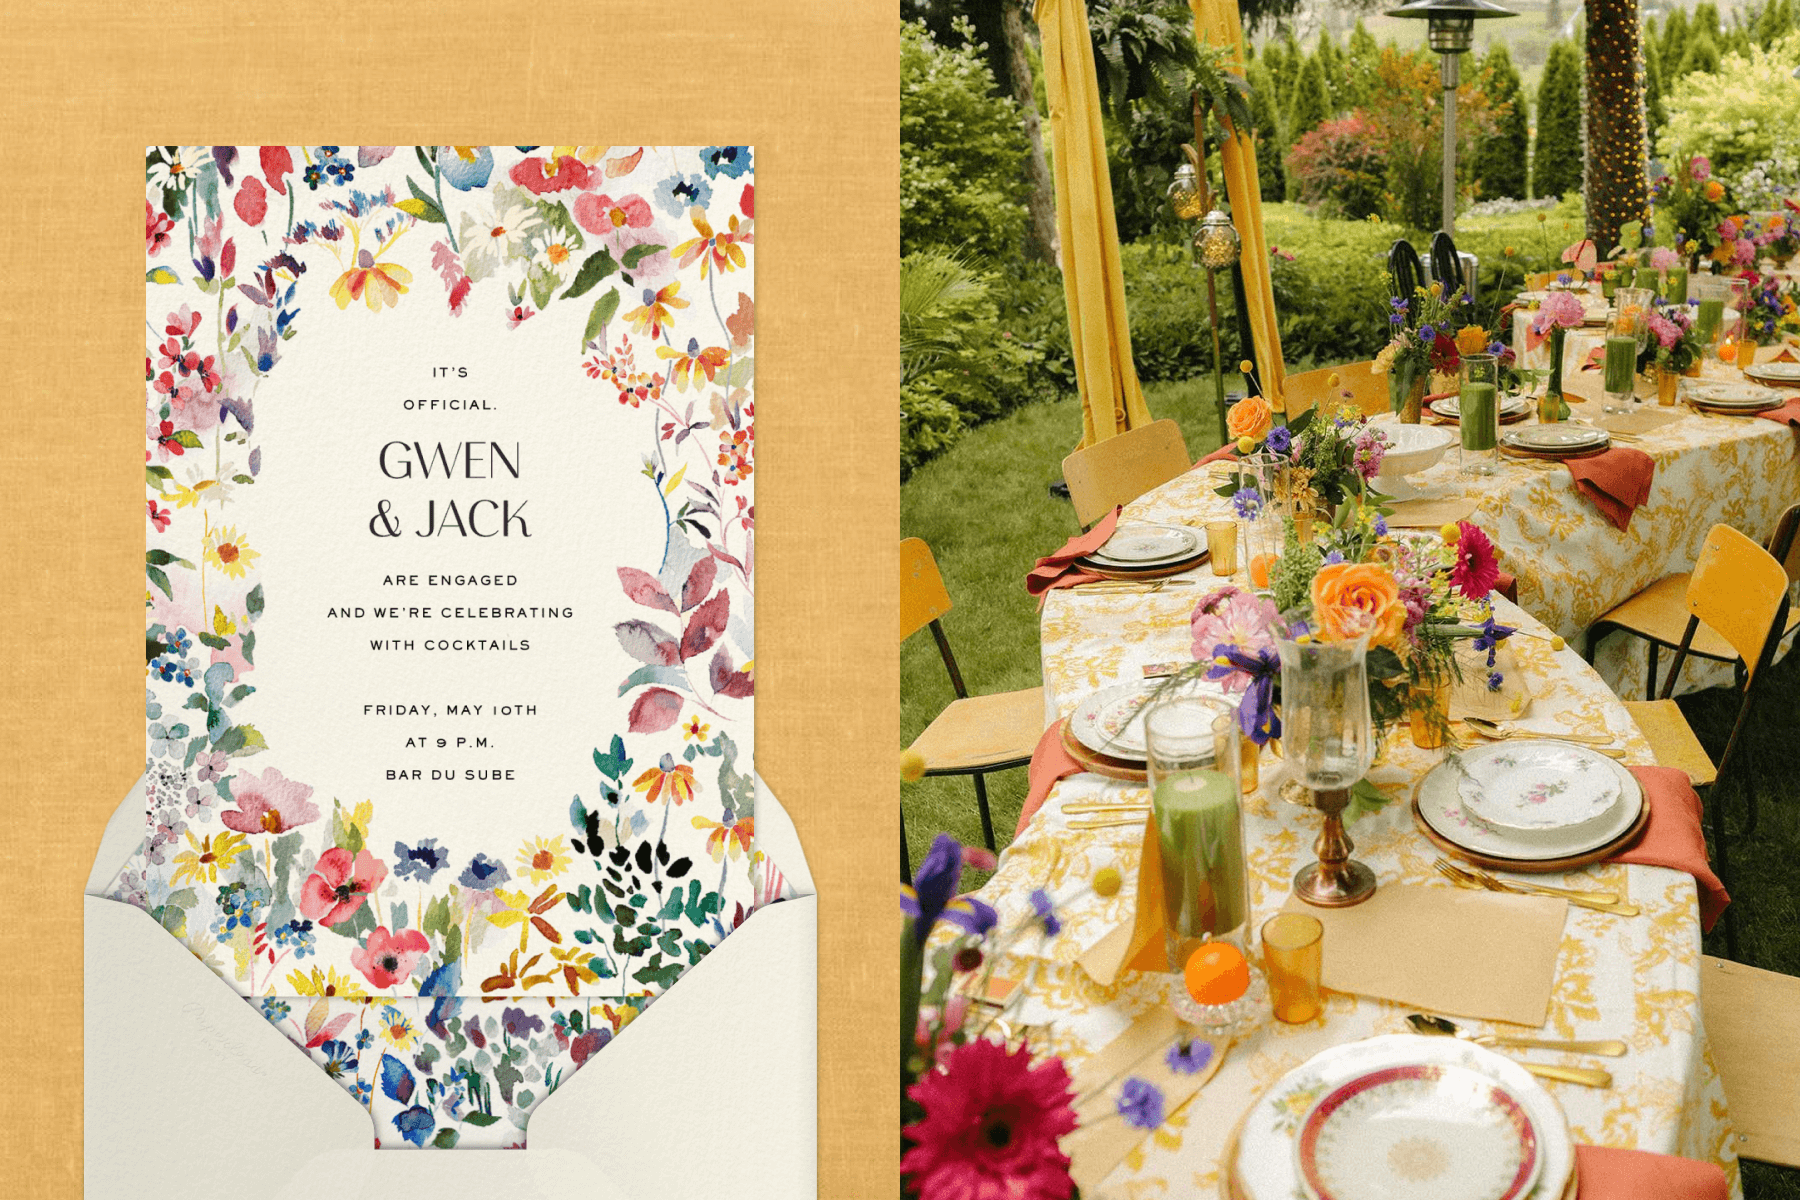 Left: A multicolored floral engagement party invitation; Right: A curved table set with orange, purple, and yellow décor.